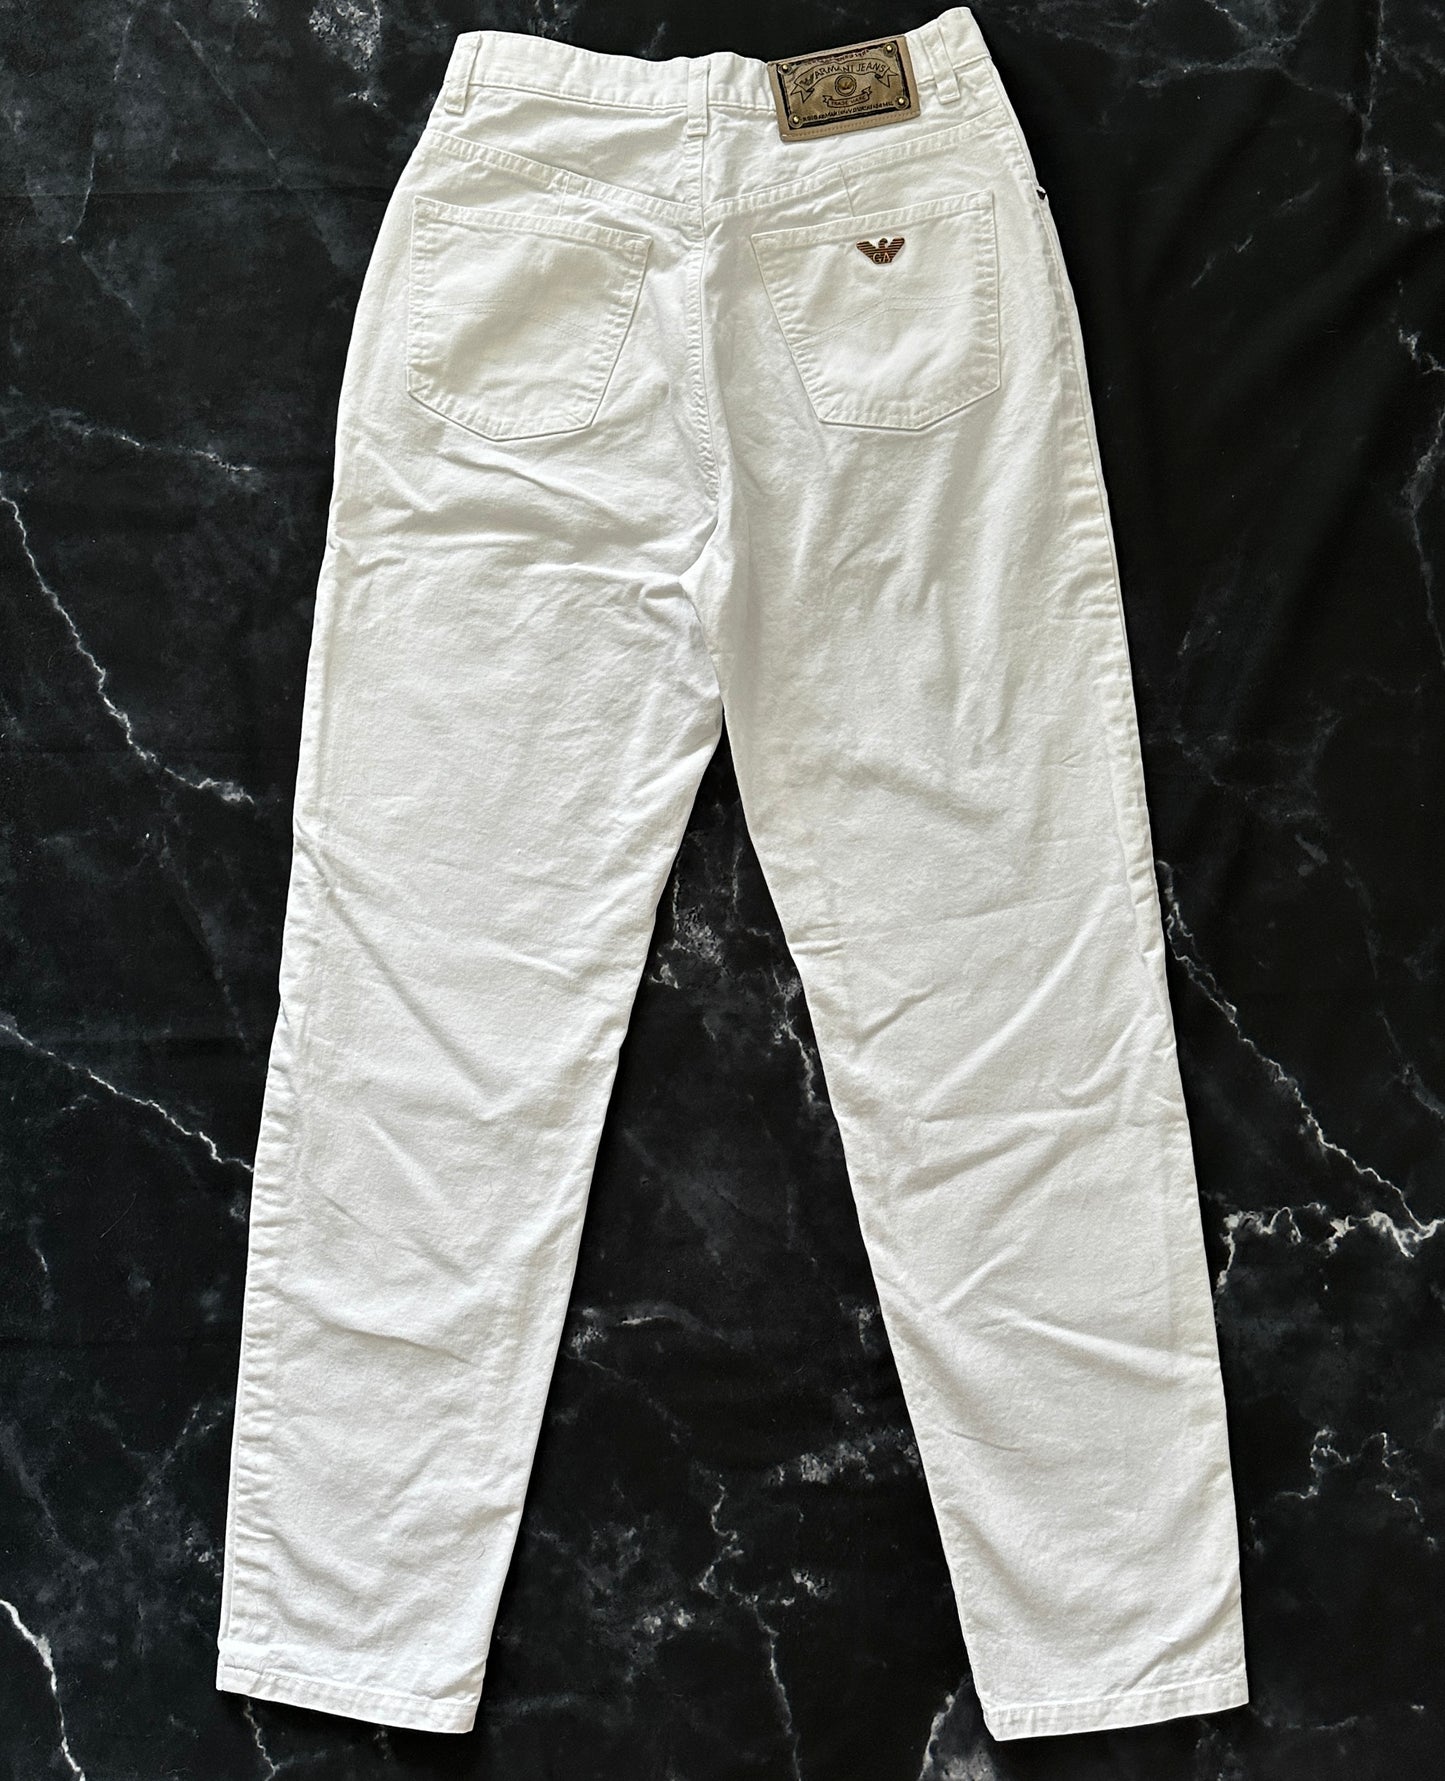 Armani Jeans Vintage 80s Pants - 32 - Made in Italy